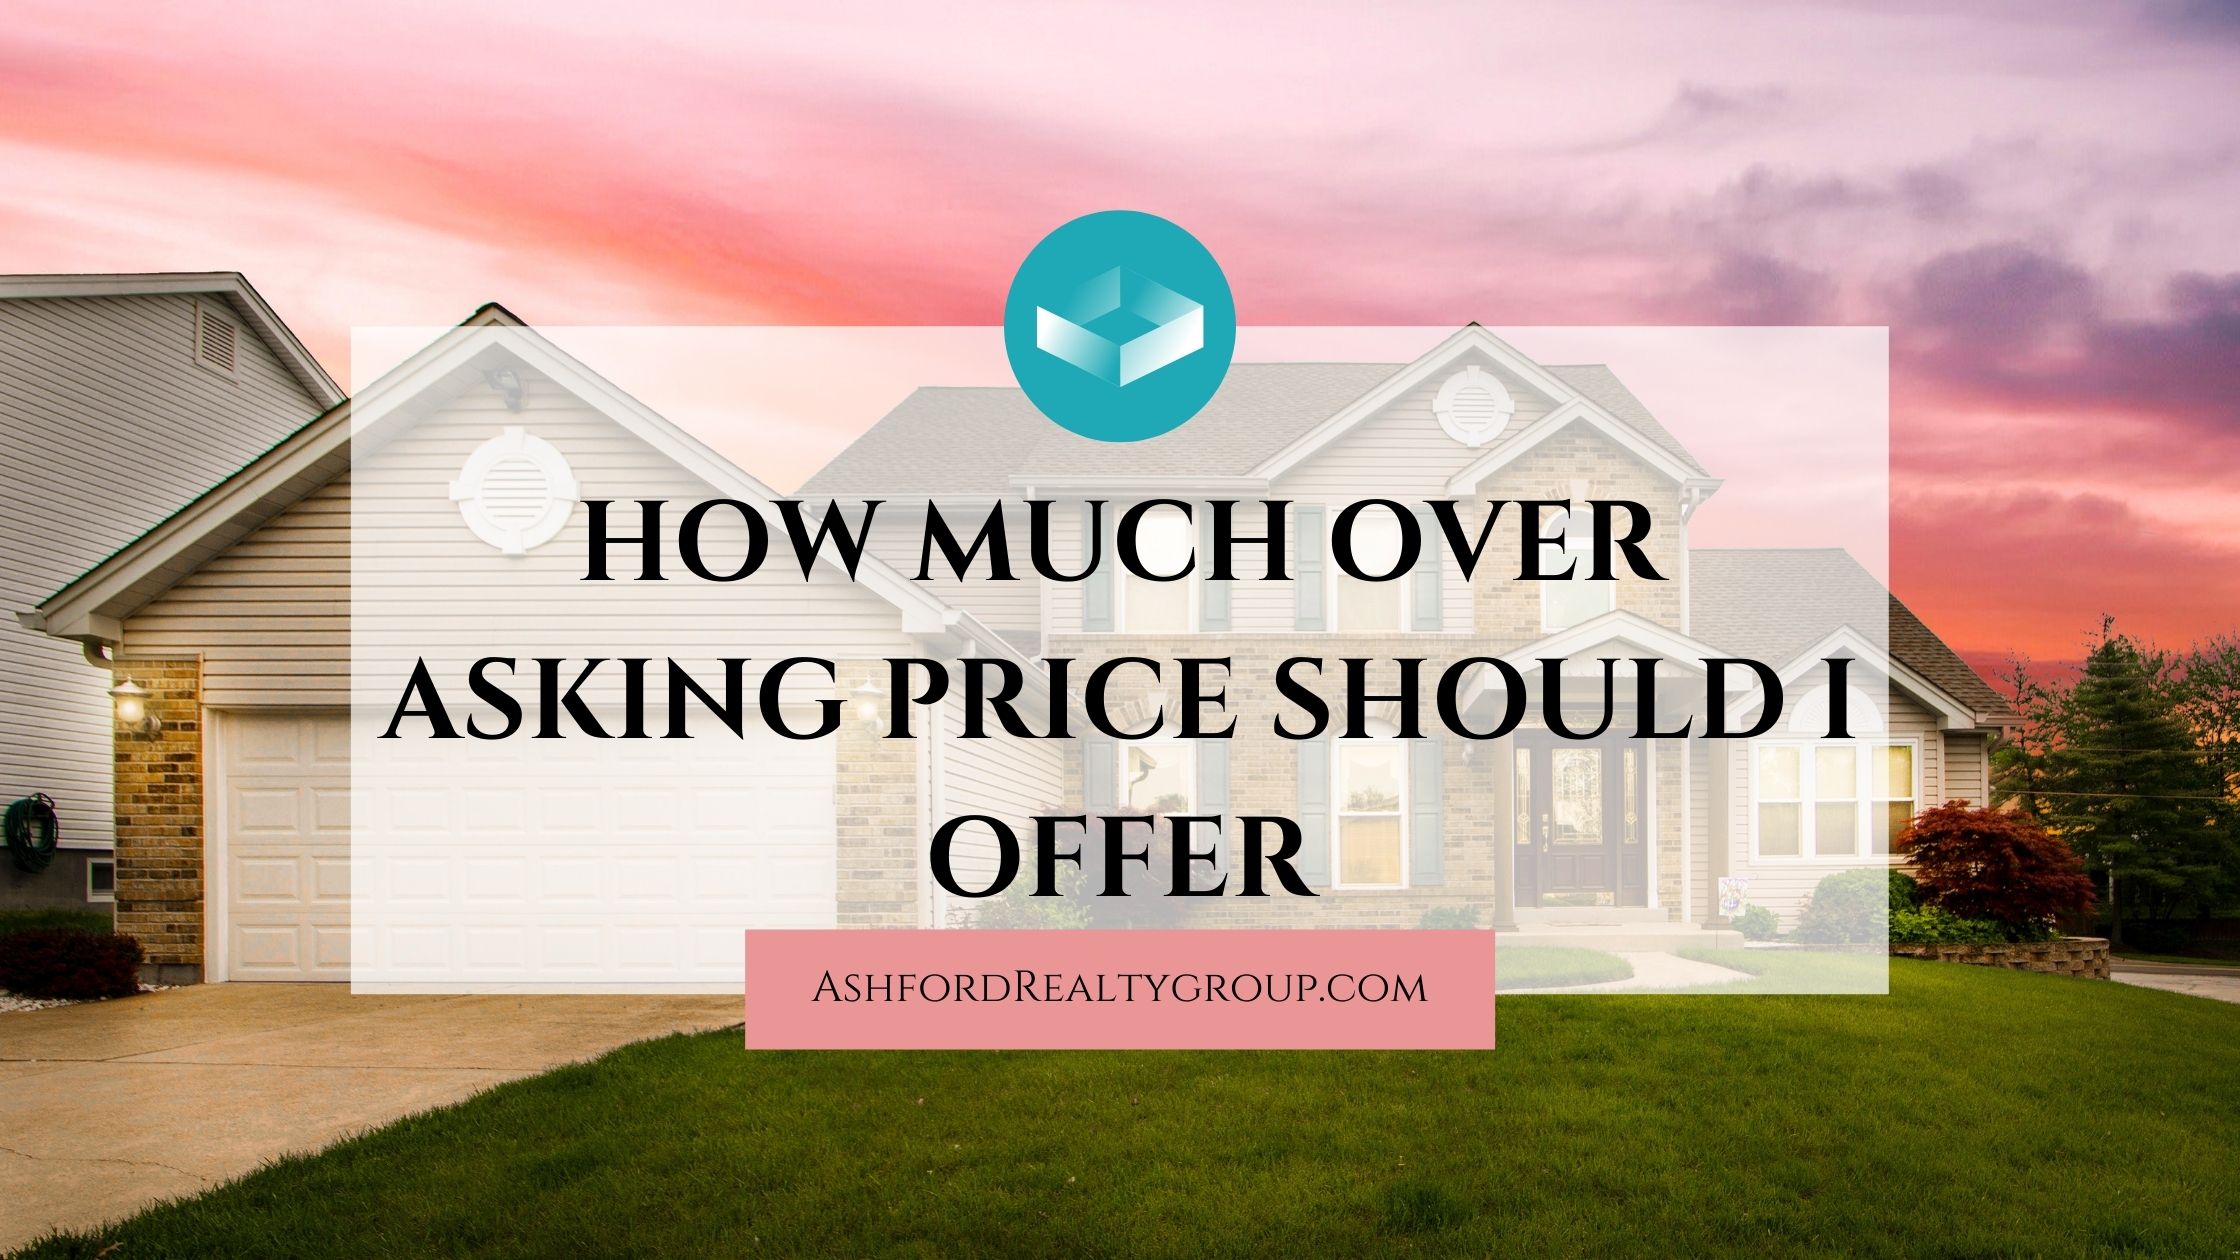 How Much Over Asking Price Should I Offer